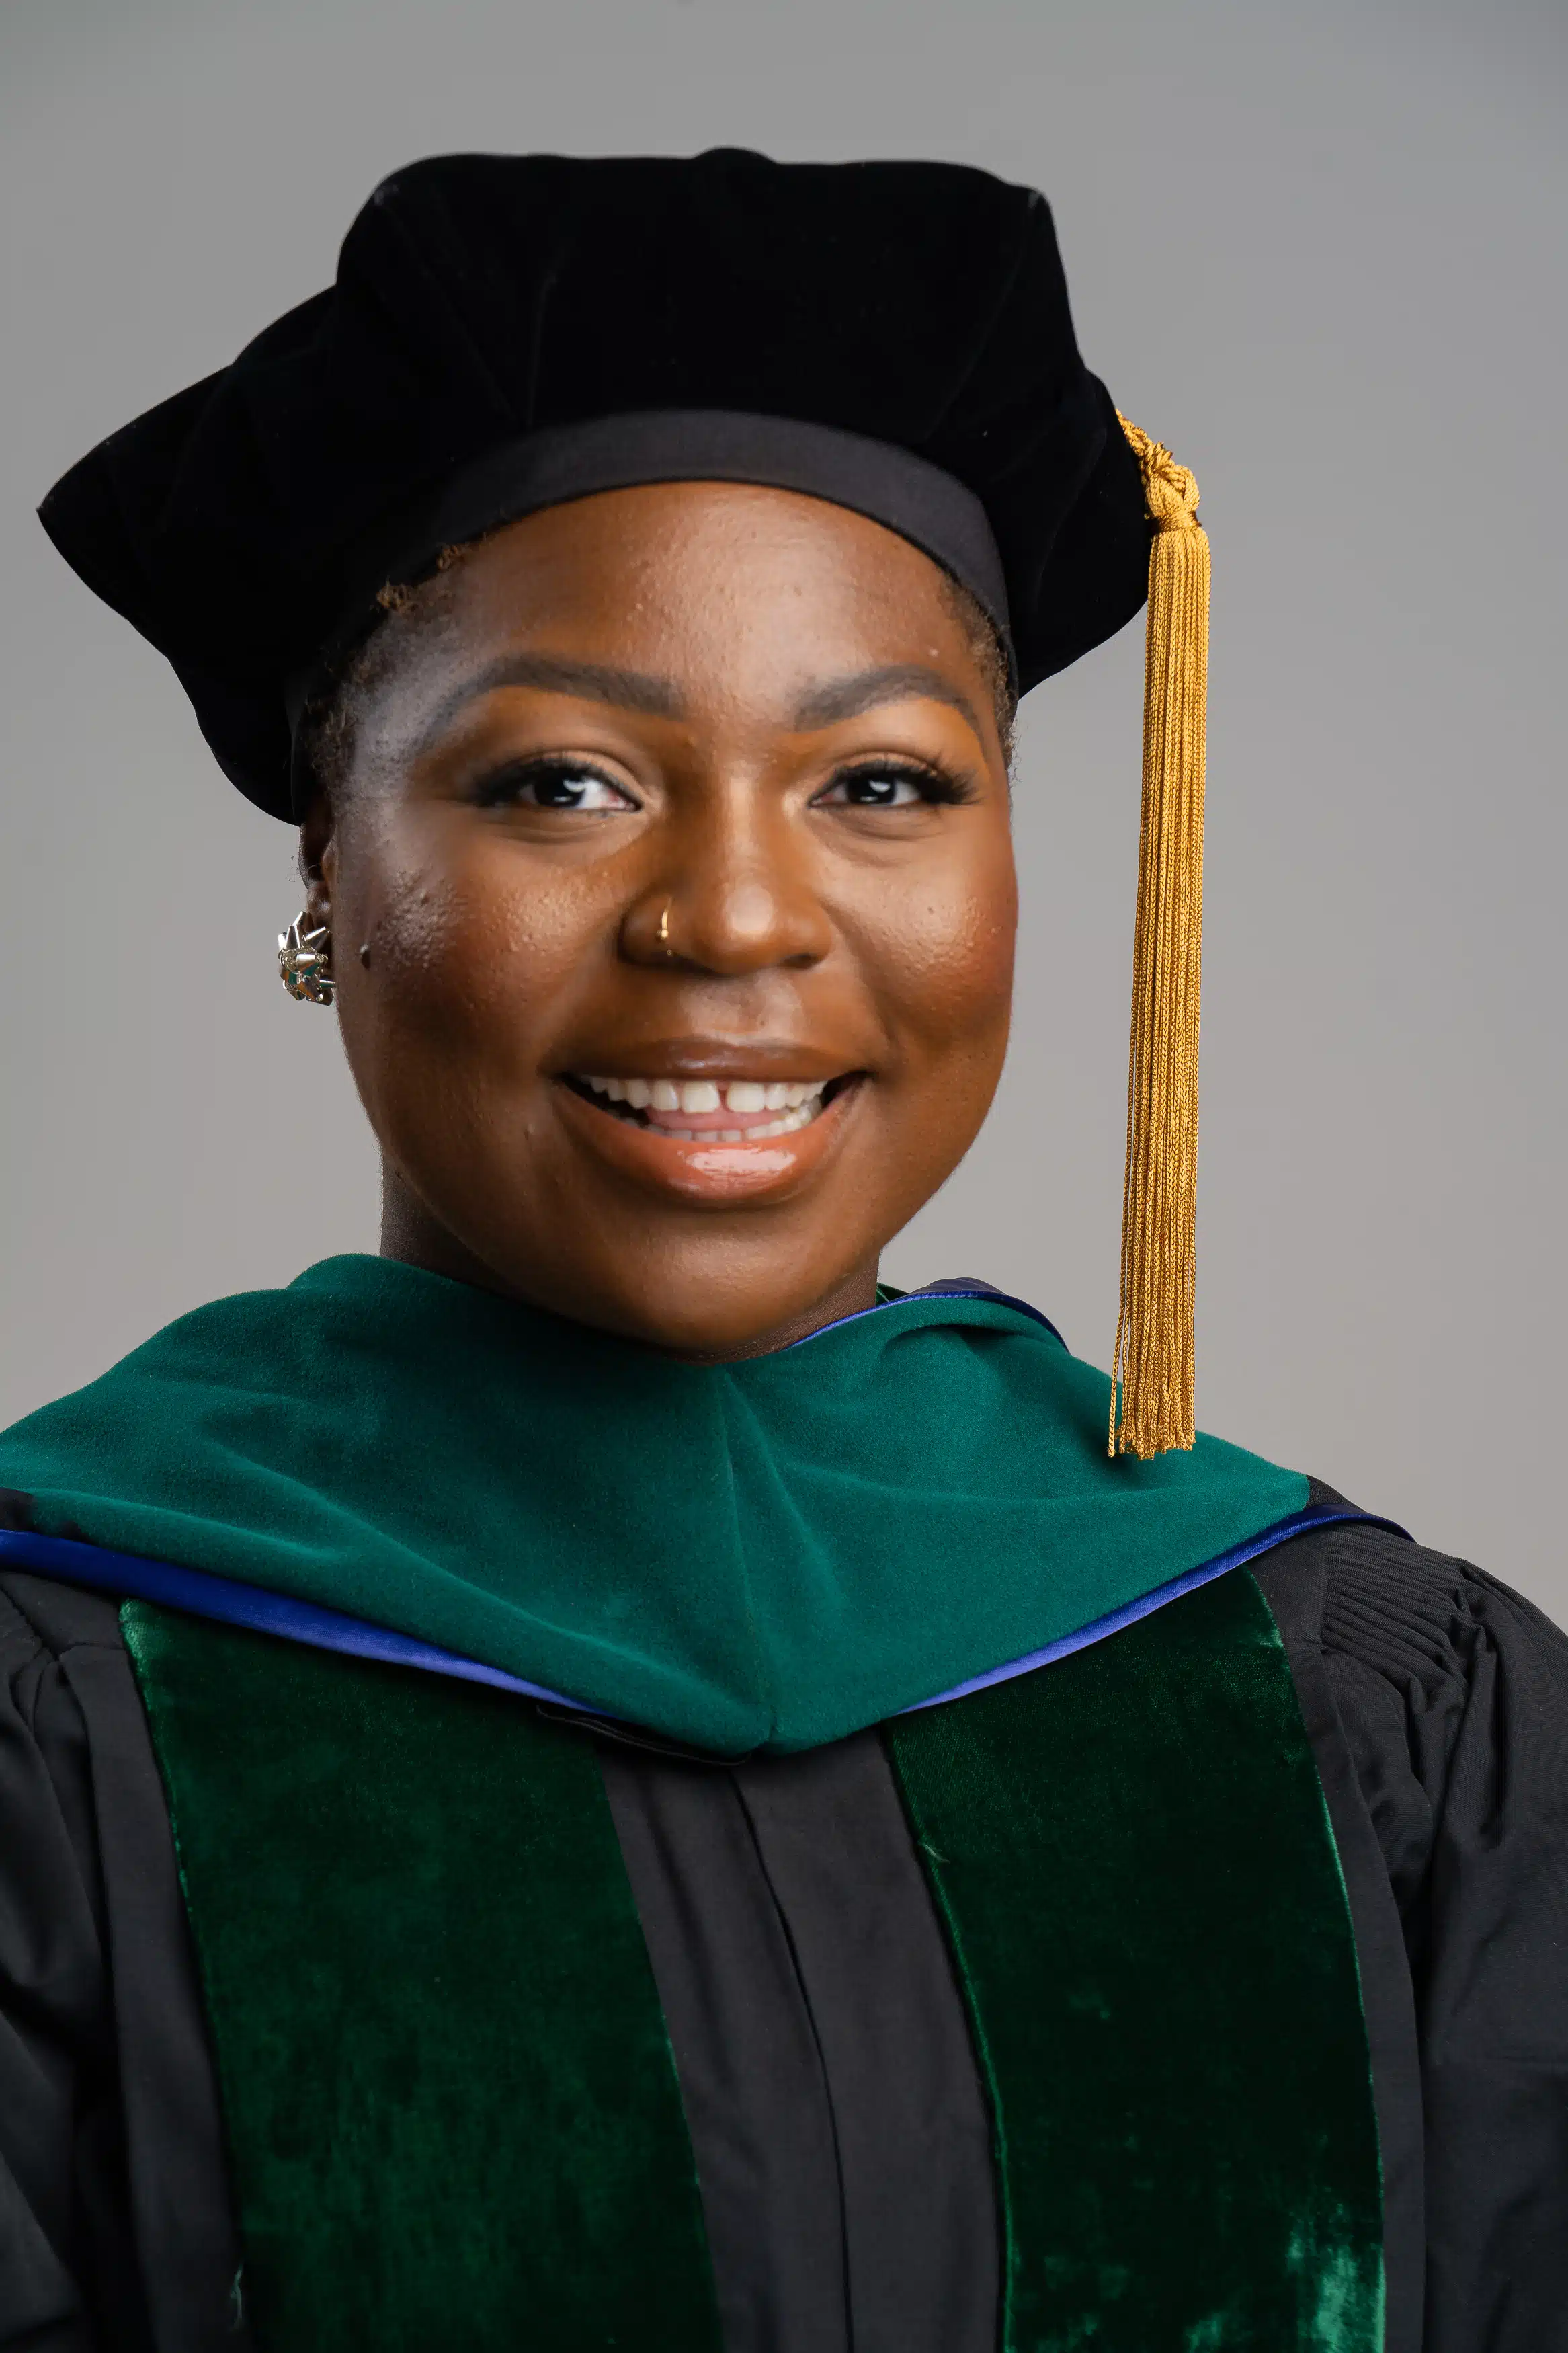 black woman ECU student graduating and taking pre graduation photos and headshot photos for medical school. While wearing cap and gown.